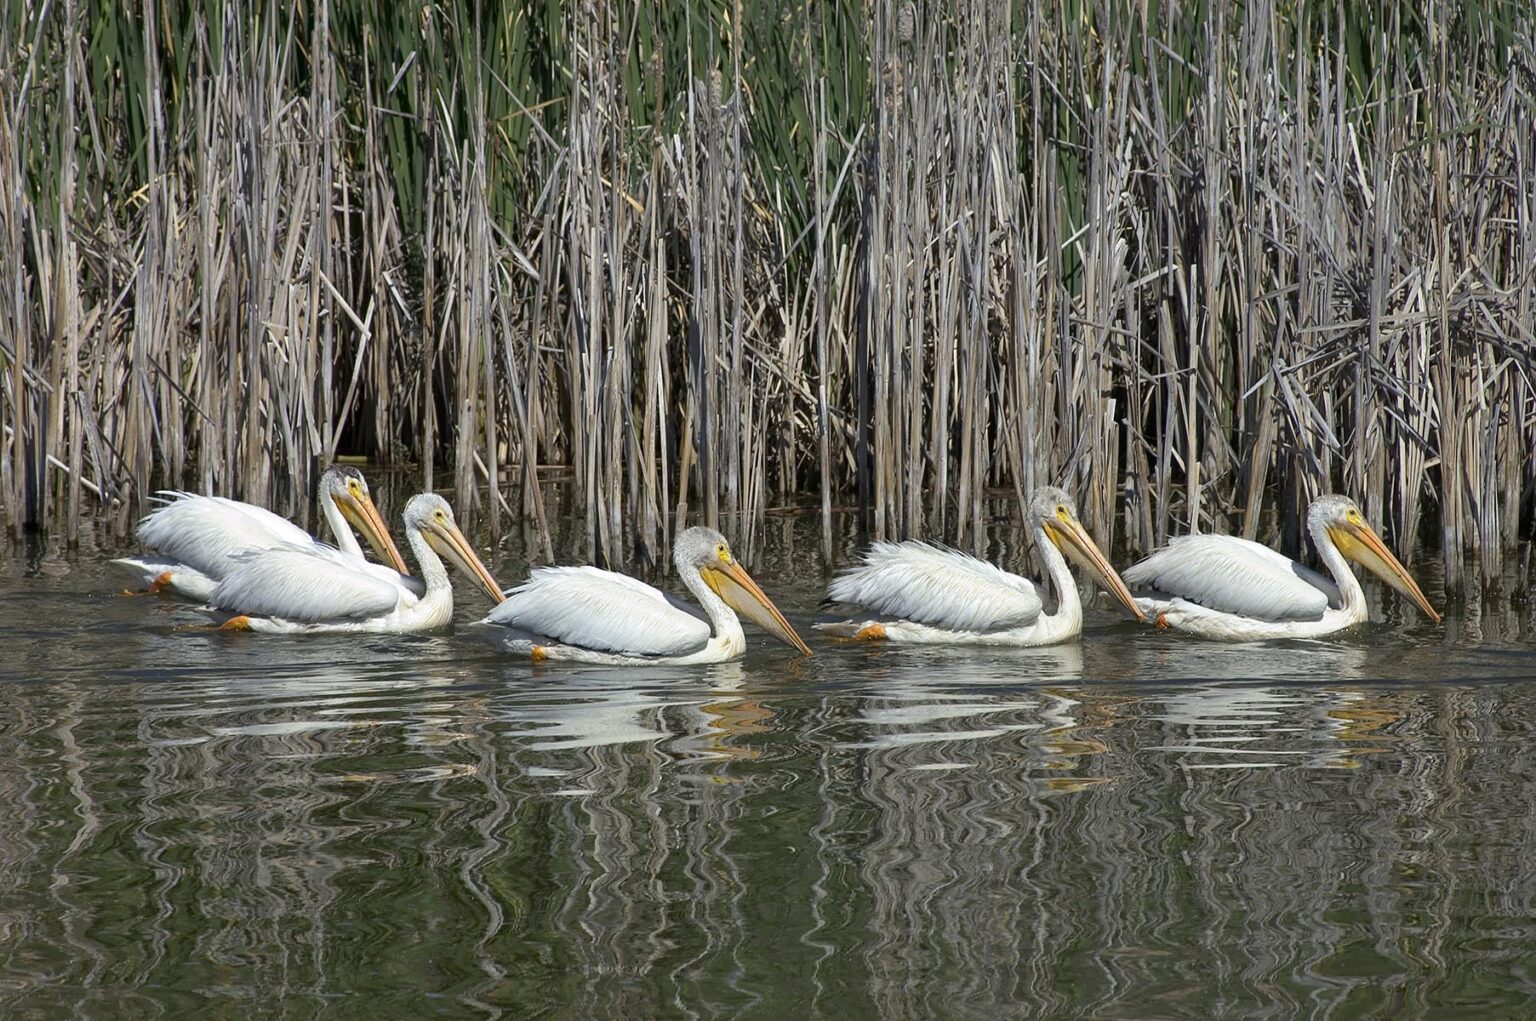 Five American White Pelicans (Pelecanus erythrorhynchos) land in a canal - Northern California